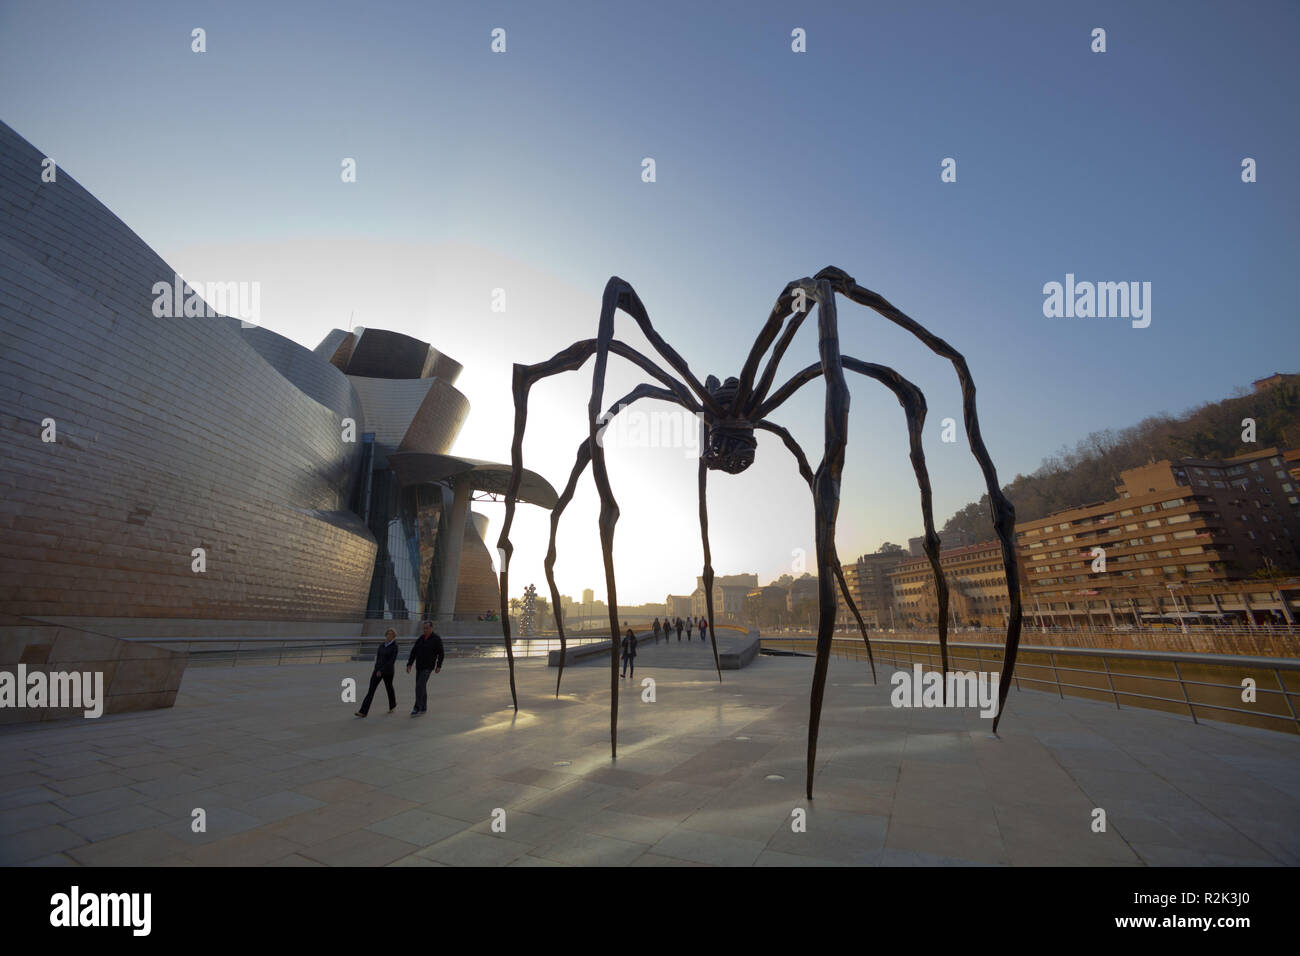 Spain, Basque country, Bilbao, Guggenheim Museum, architect Frank O. Gehry, piece of art, spider 'Maman', Stock Photo